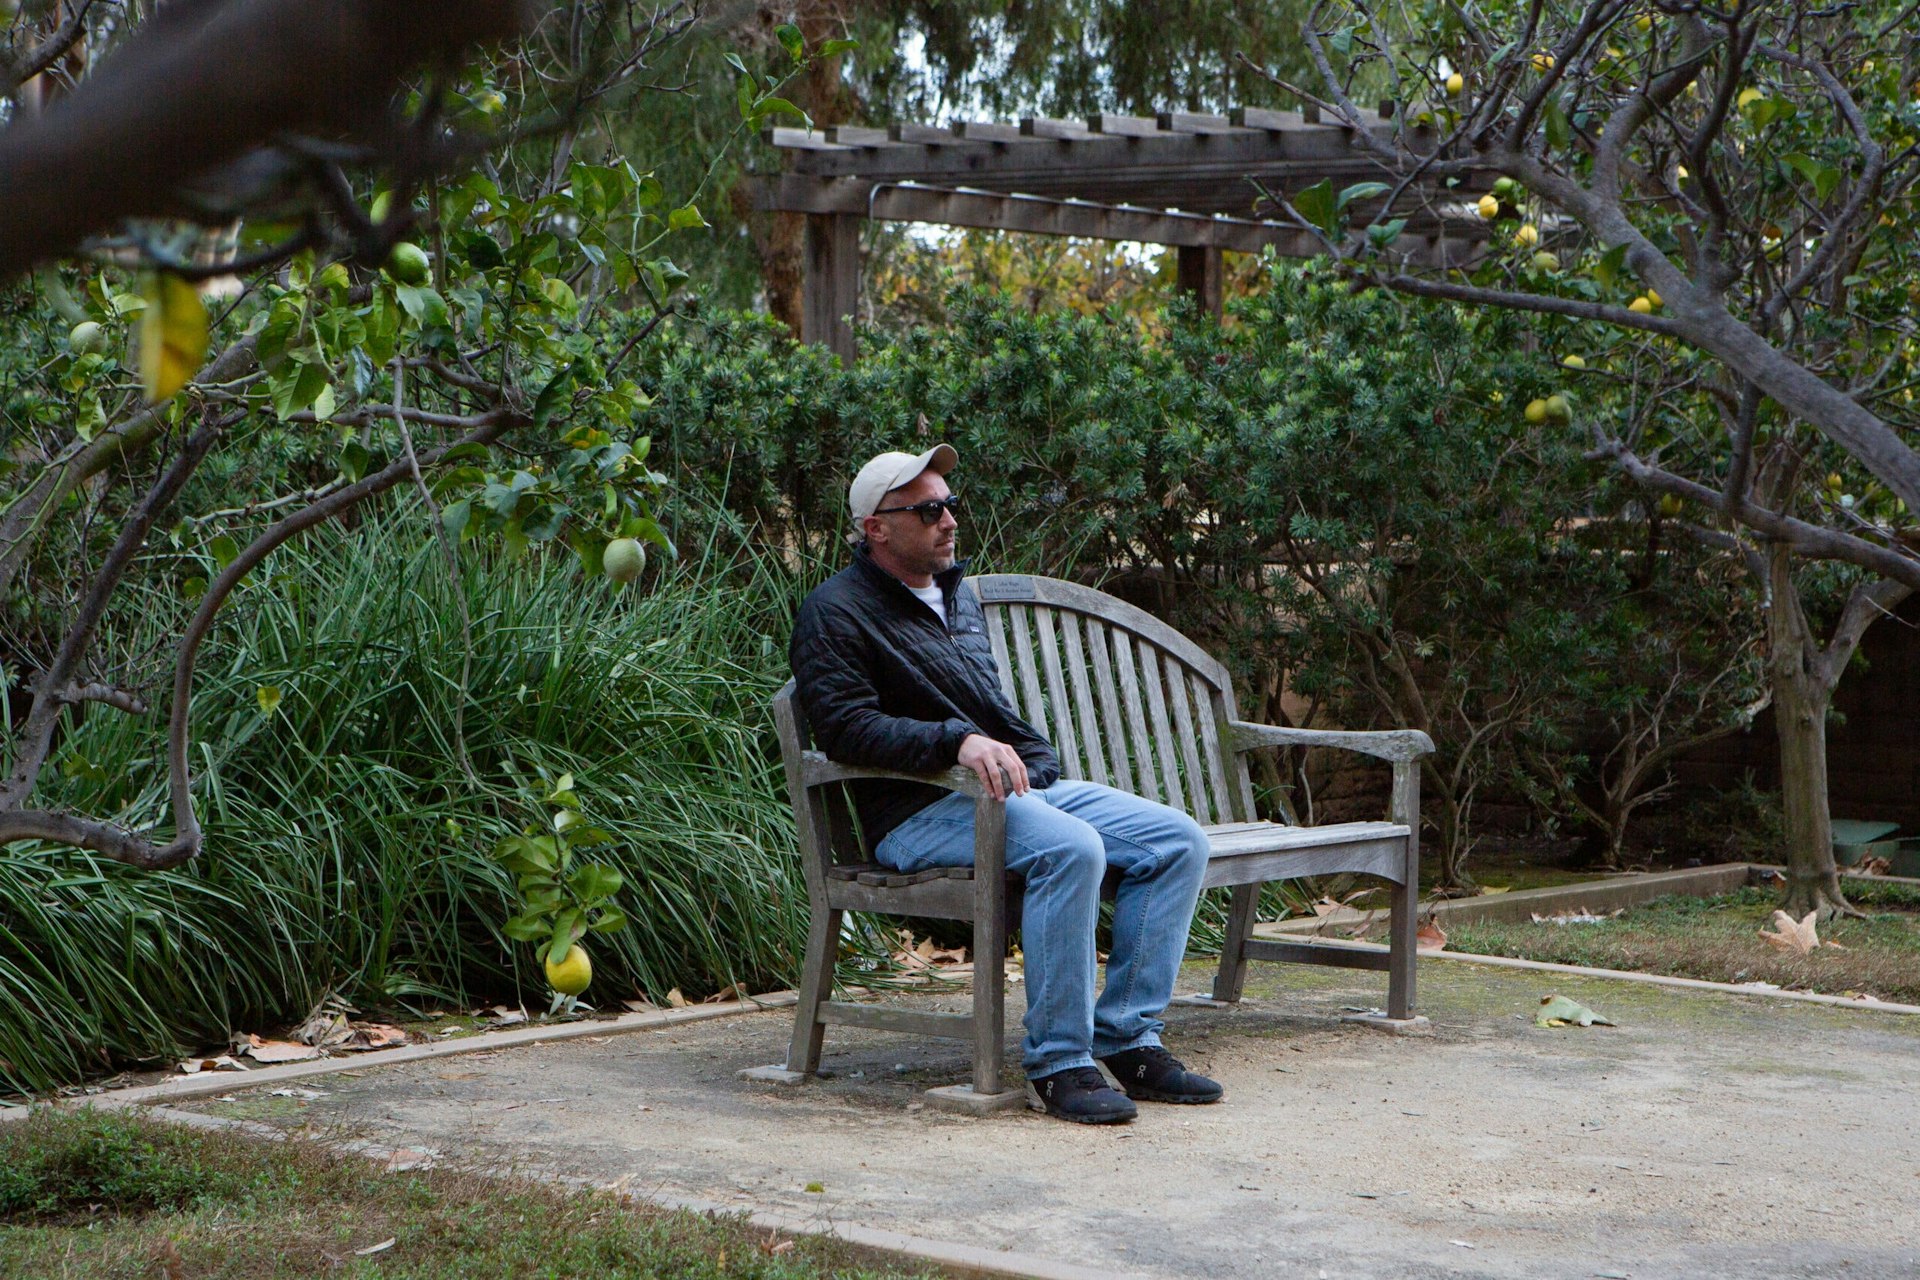 Rob Reynolds, wearing a baseball hat and sunglasses, sits on a wooden bench in the West LA VA rose garden.